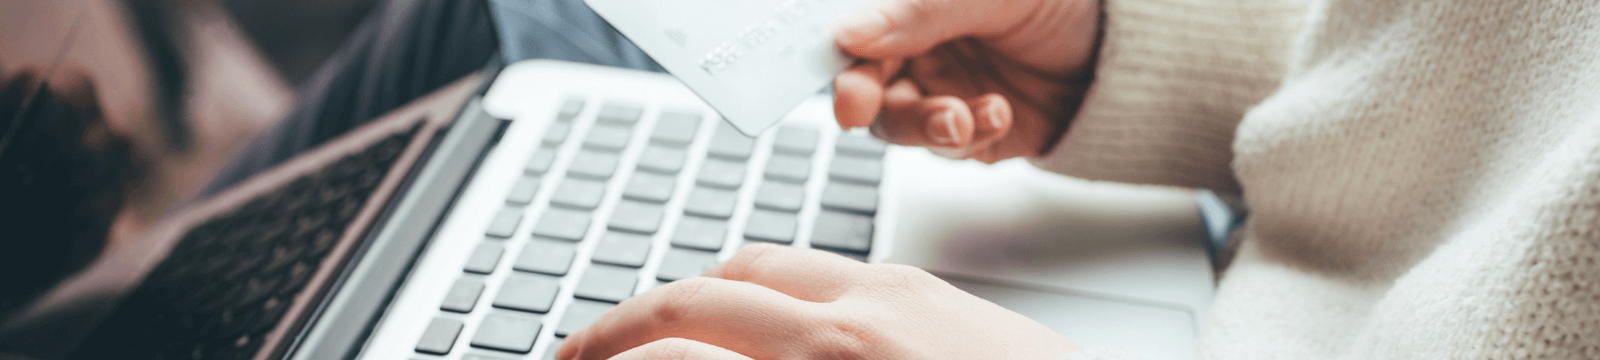 Person entering card information on computer